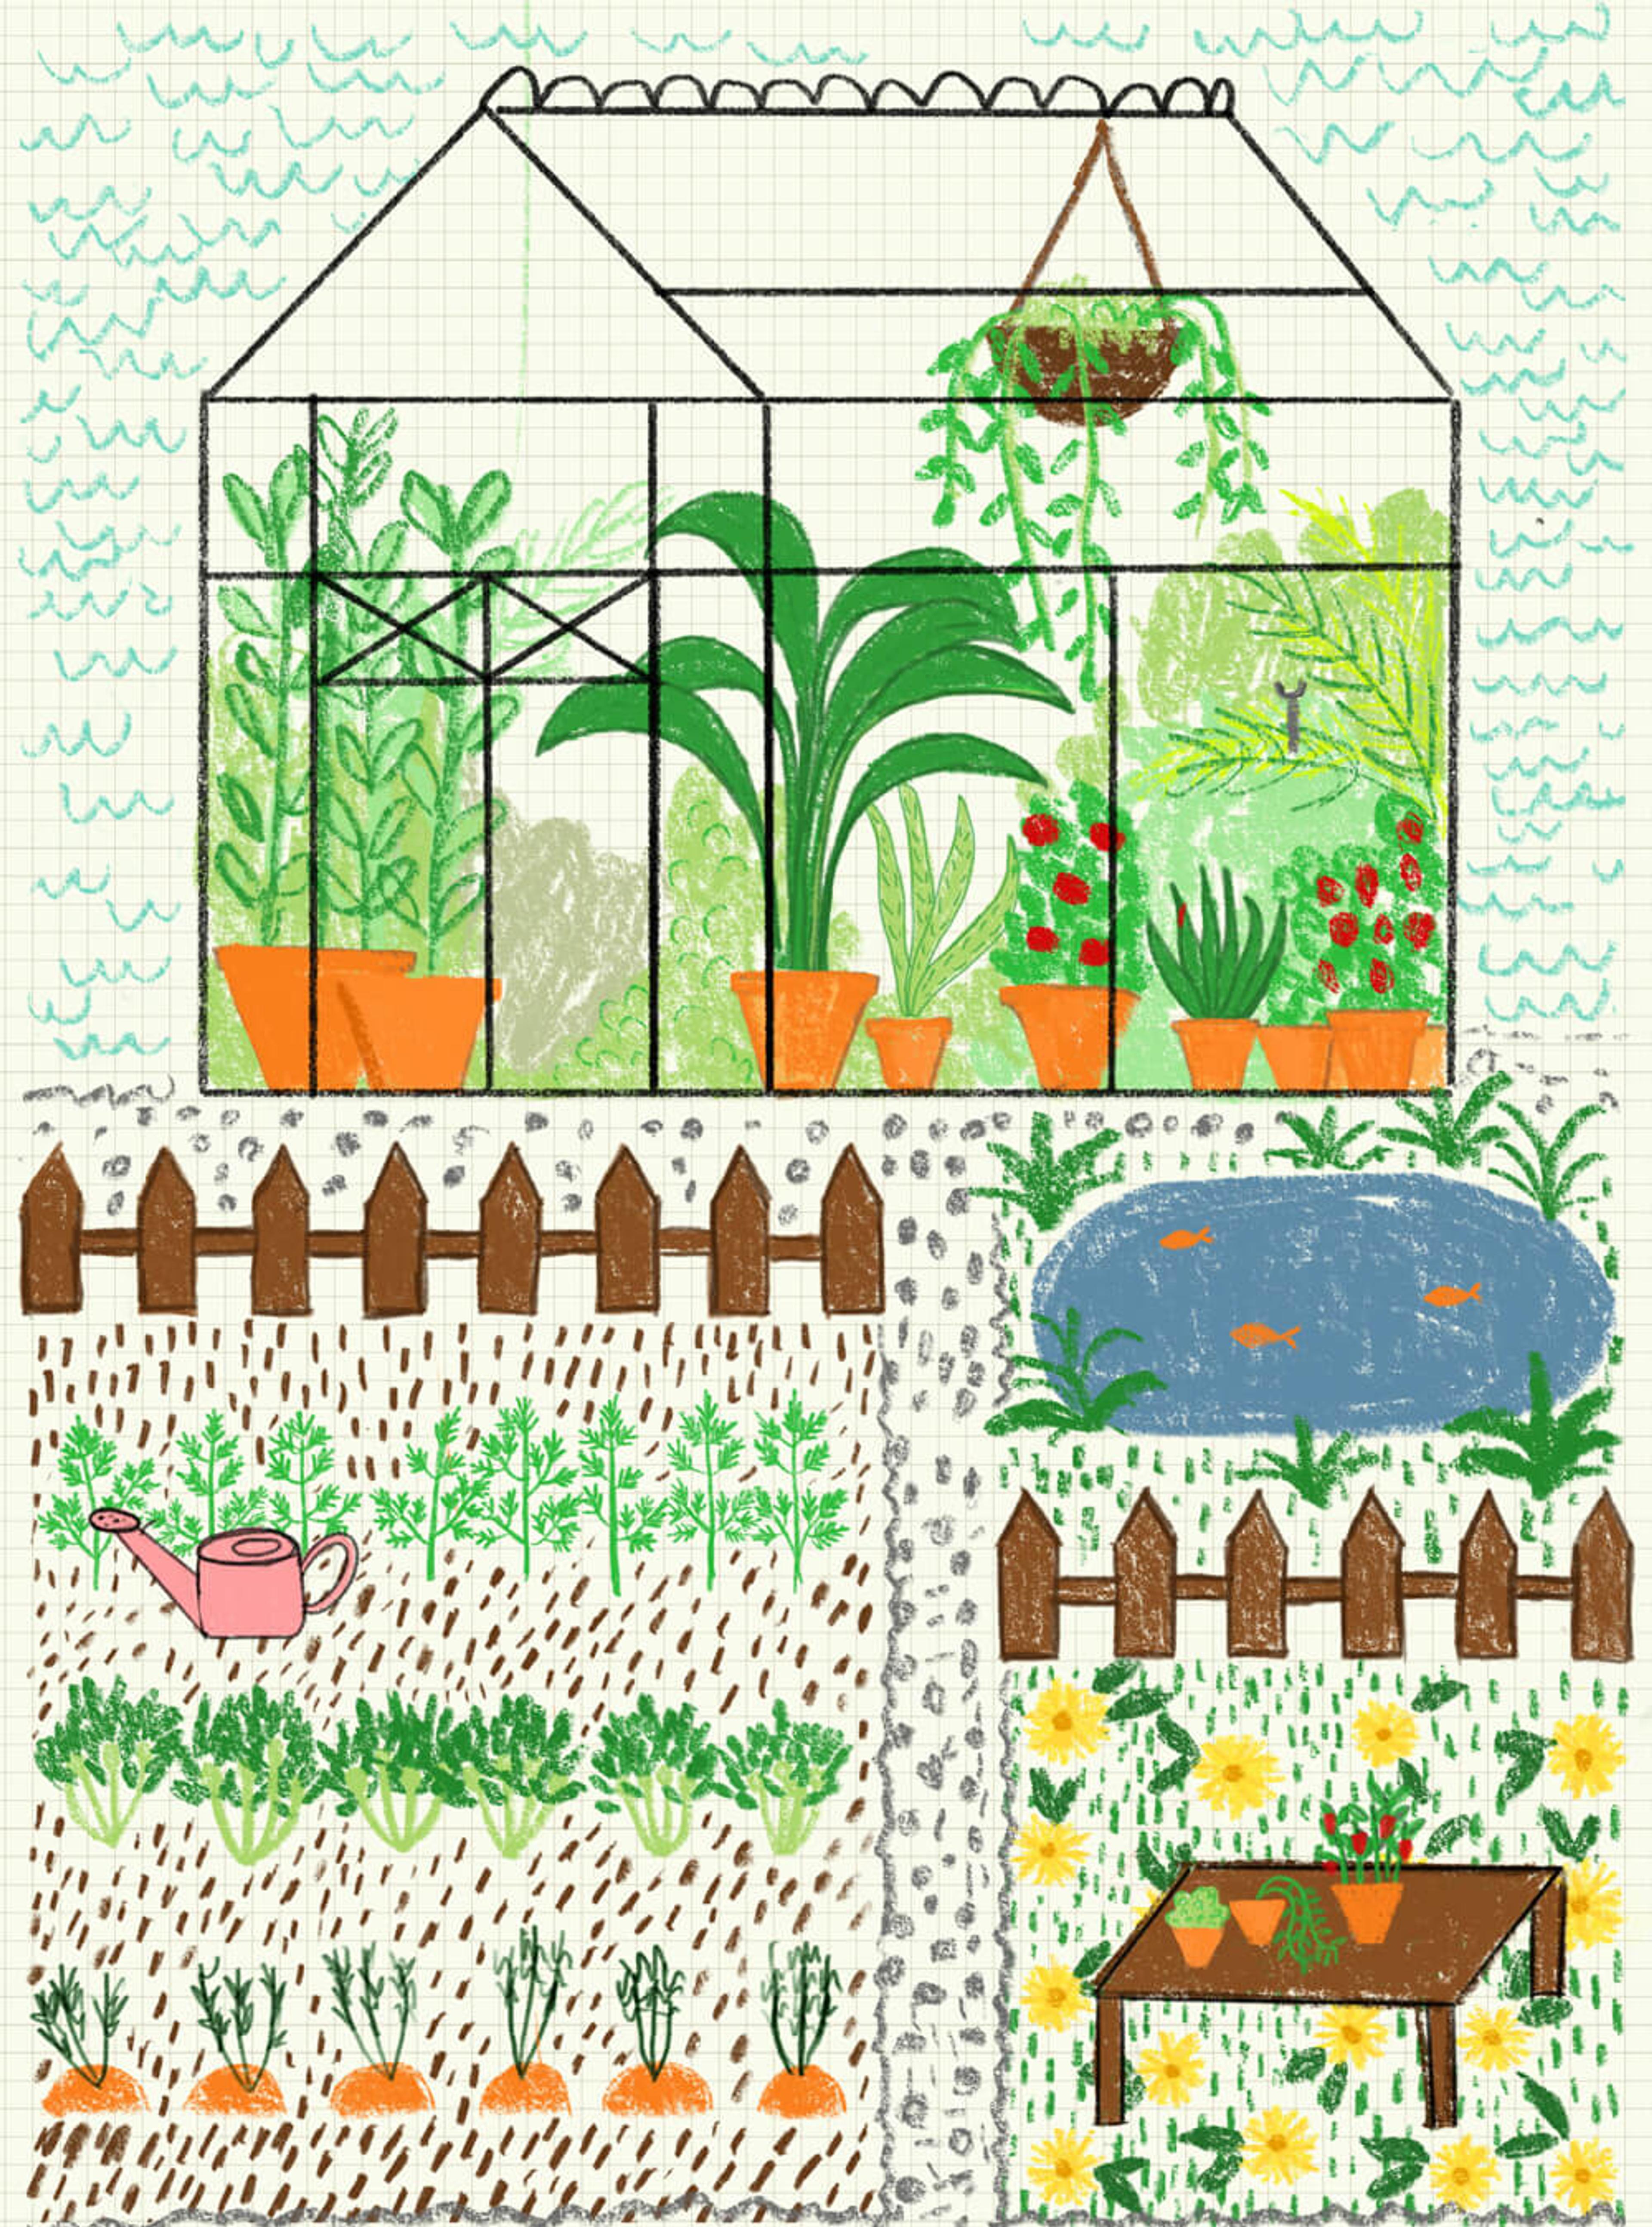 Coloured pencil illustration of a garden with a greenhouse, pond and vegetable patch